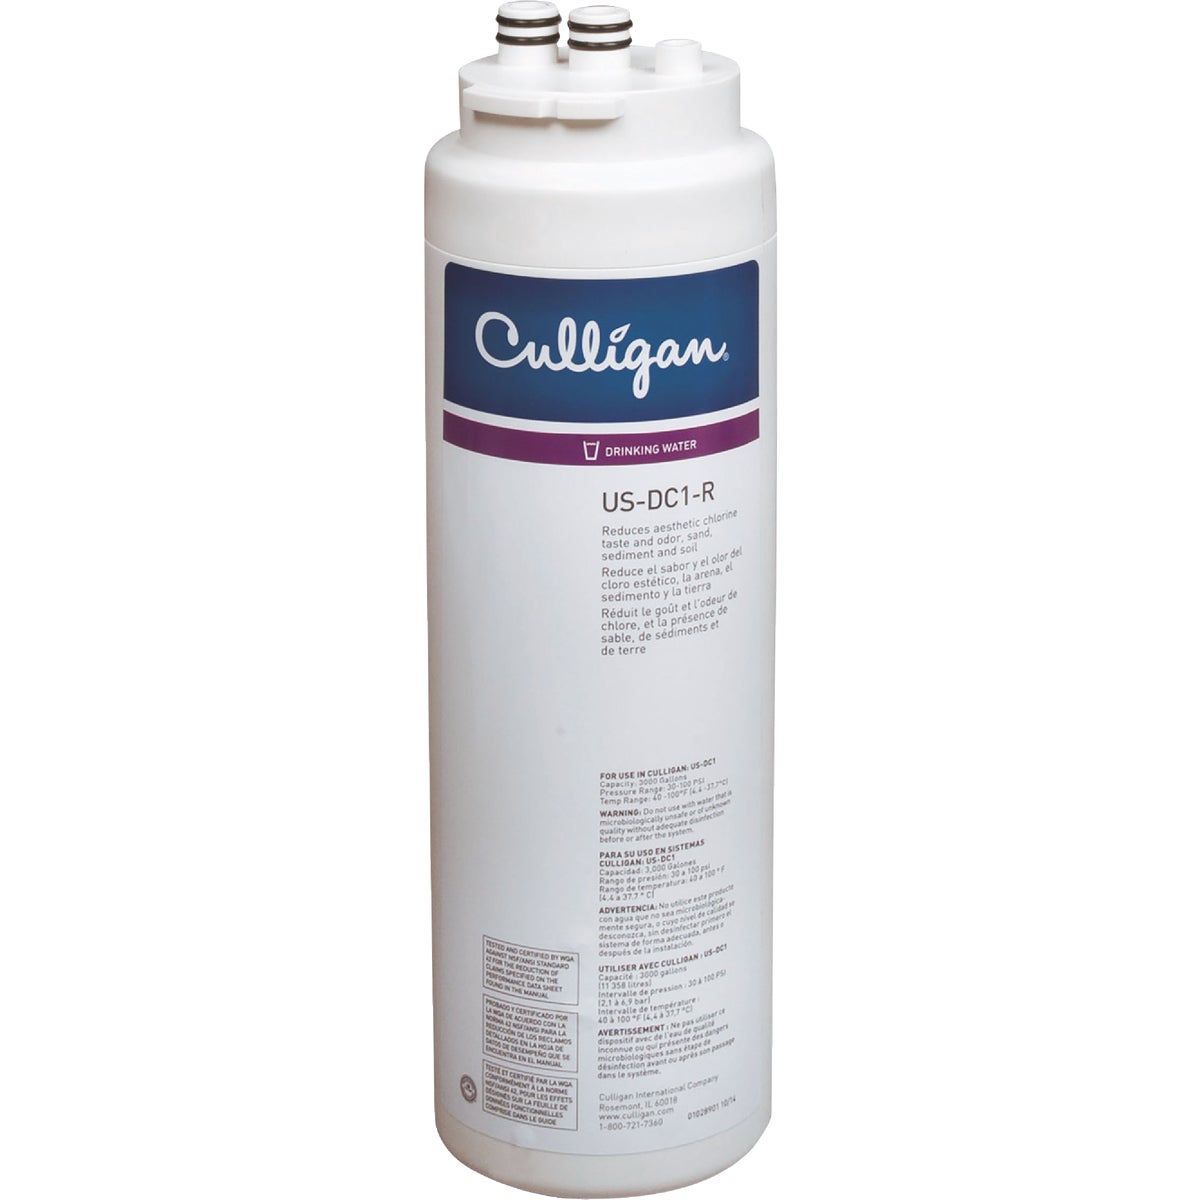 Culligan Direct Connect Standard Replacement Cartridge for US-DC1 and US-DC2 Systems